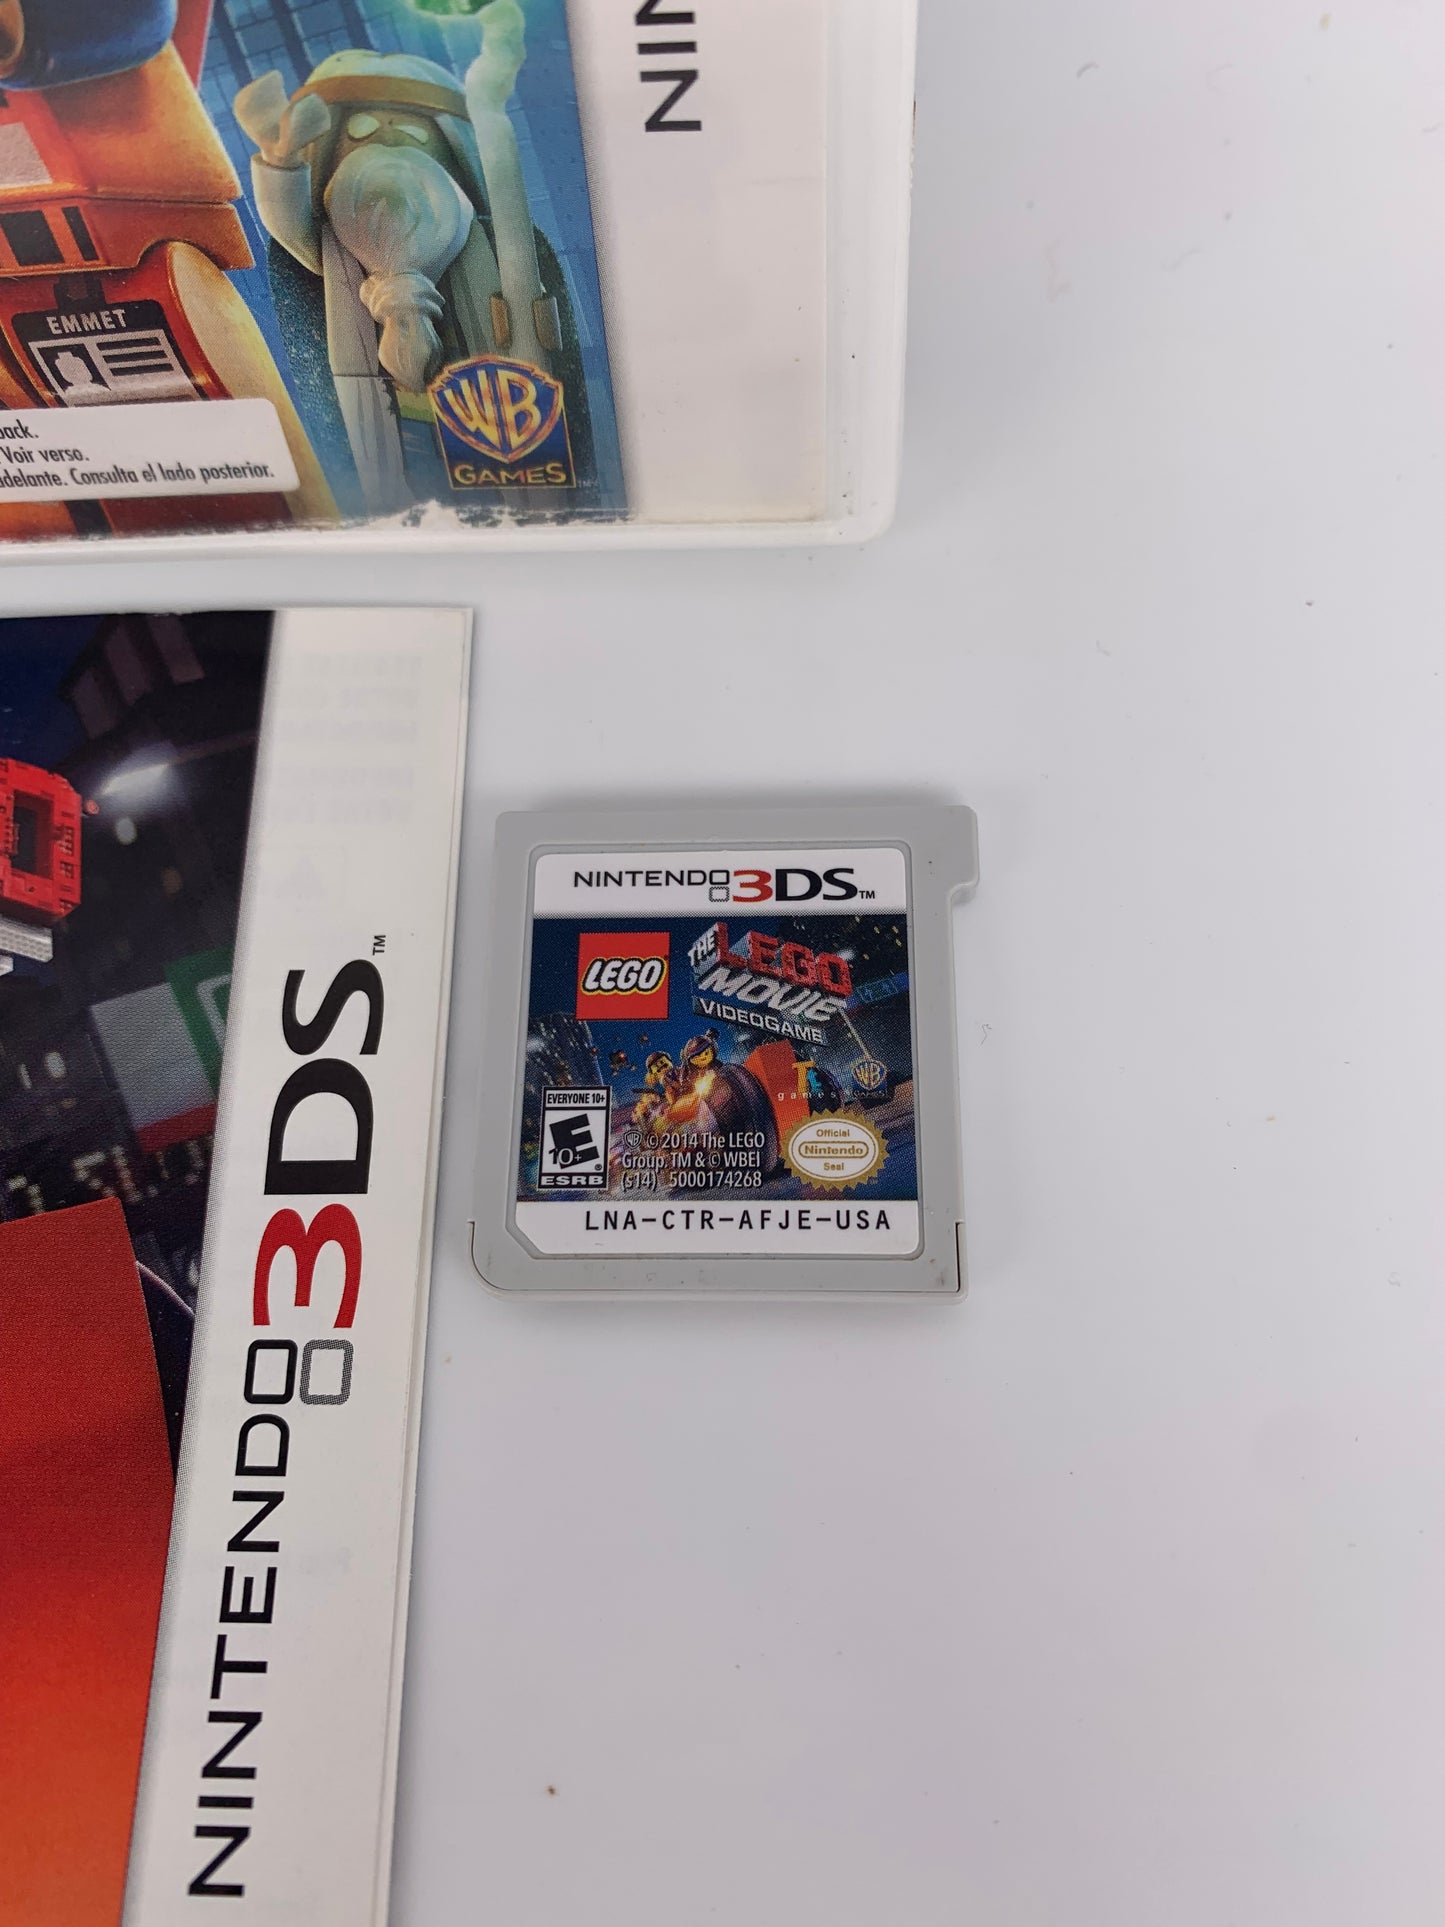 NiNTENDO 3DS | LEGO THE MOViE ViDEOGAME